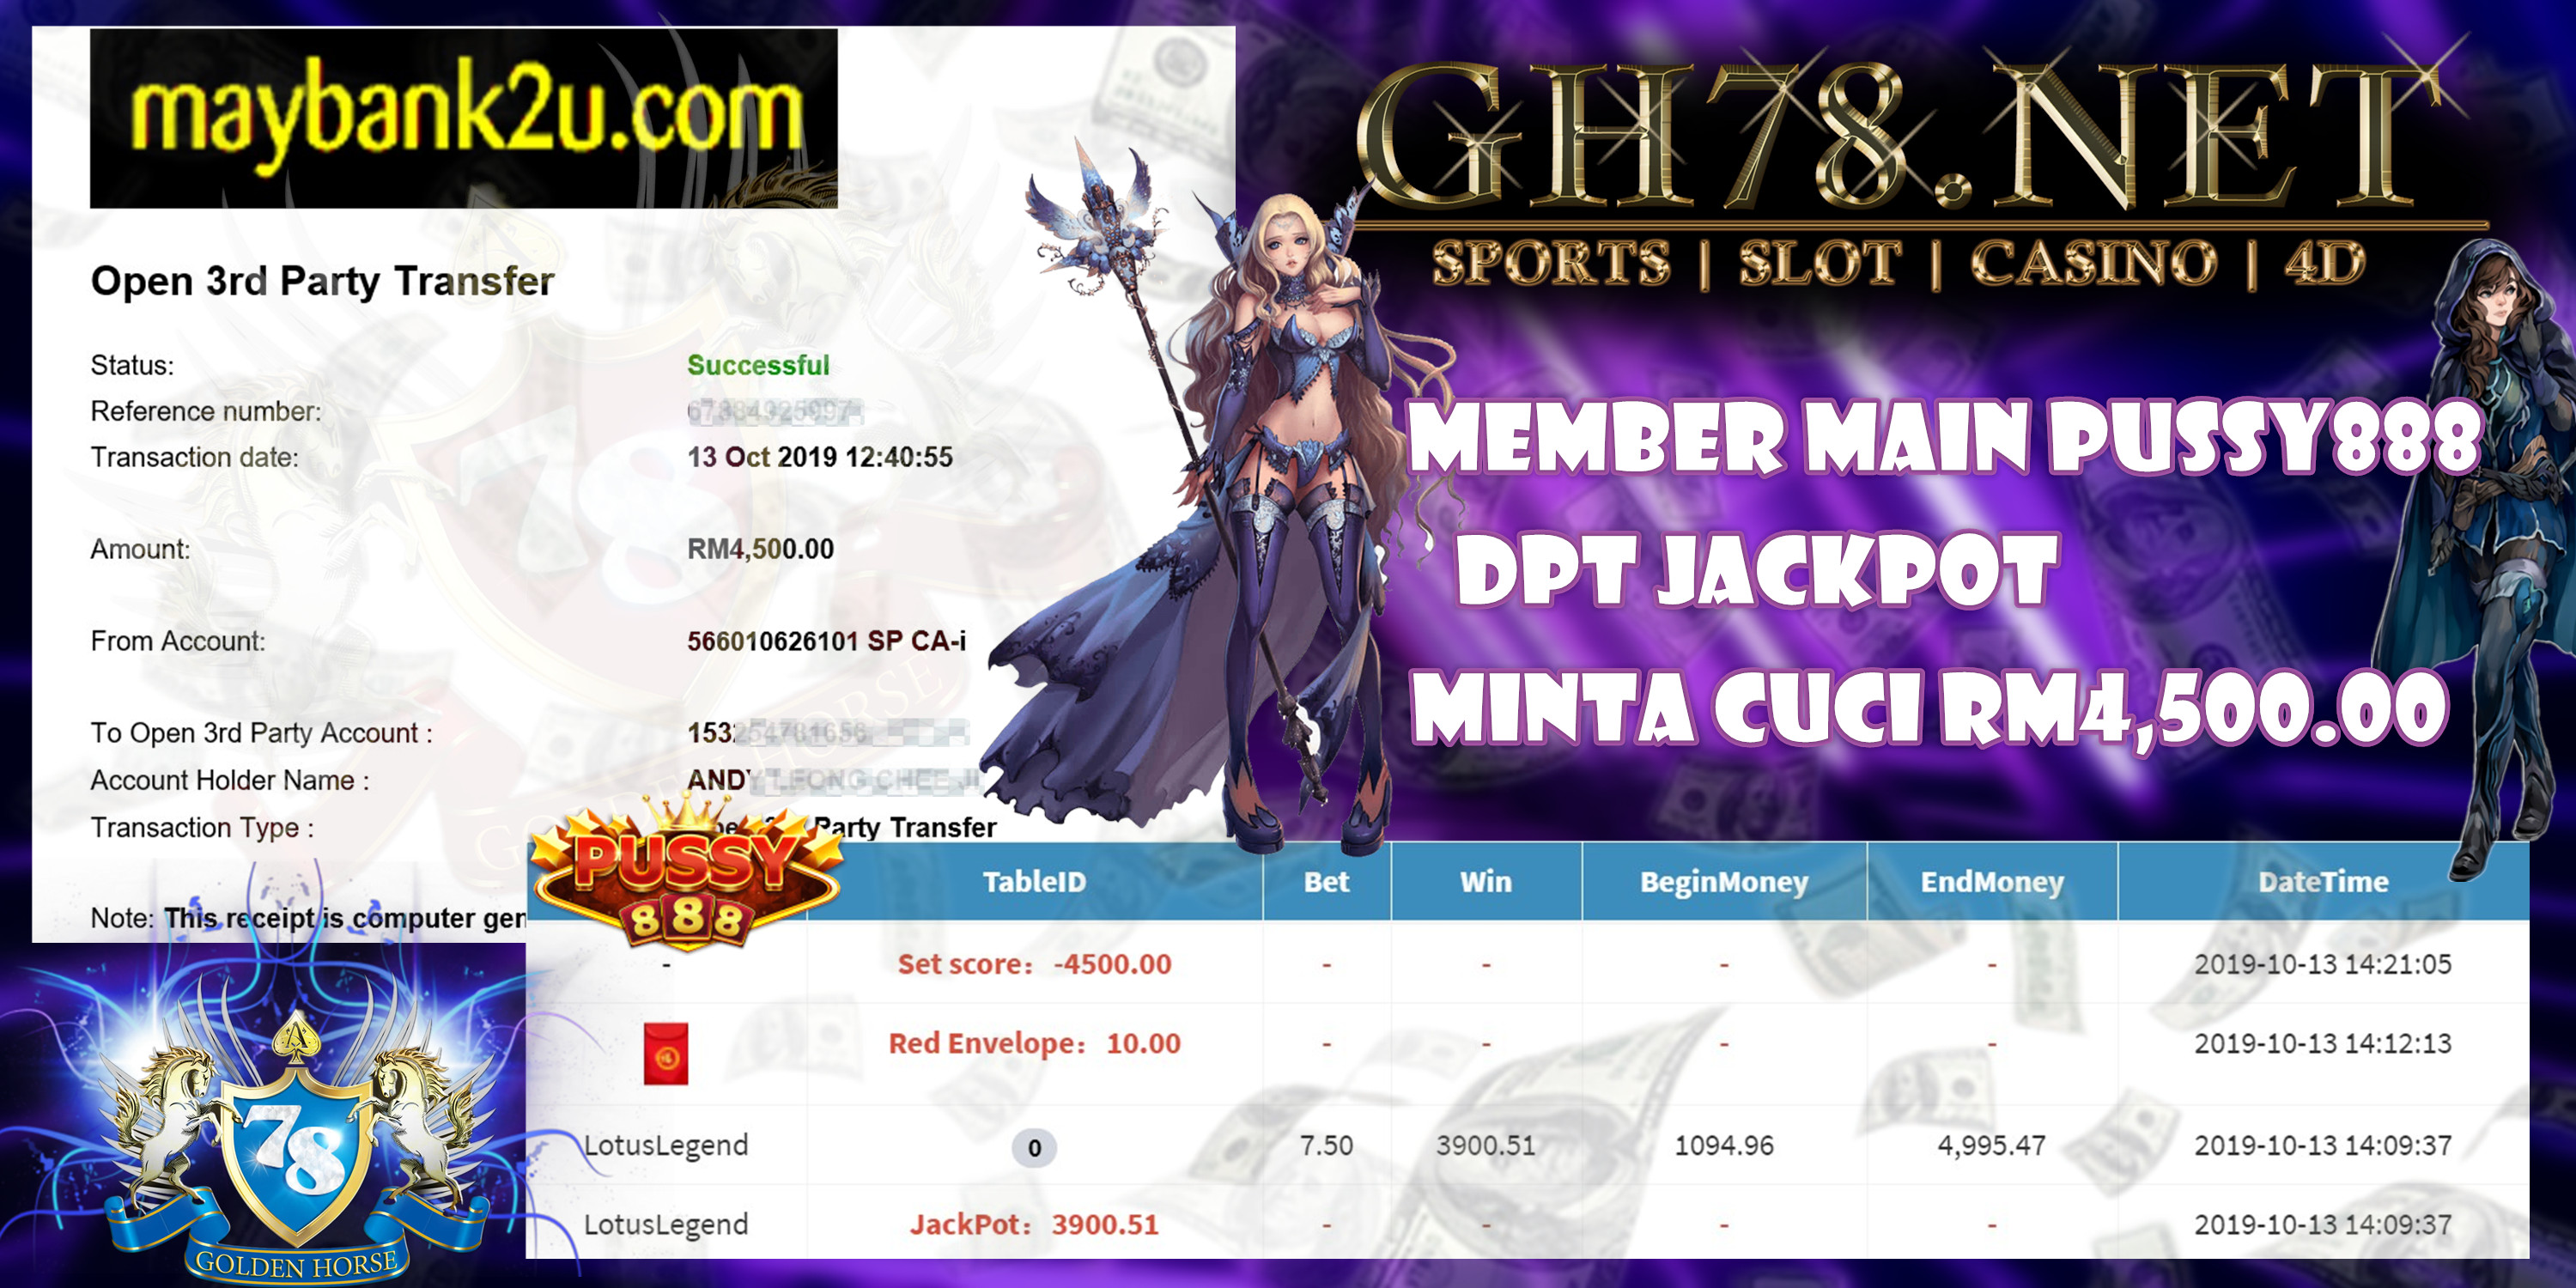 MEMBER MAIN GAME PUSSY888 MINTA OUT RM4,500